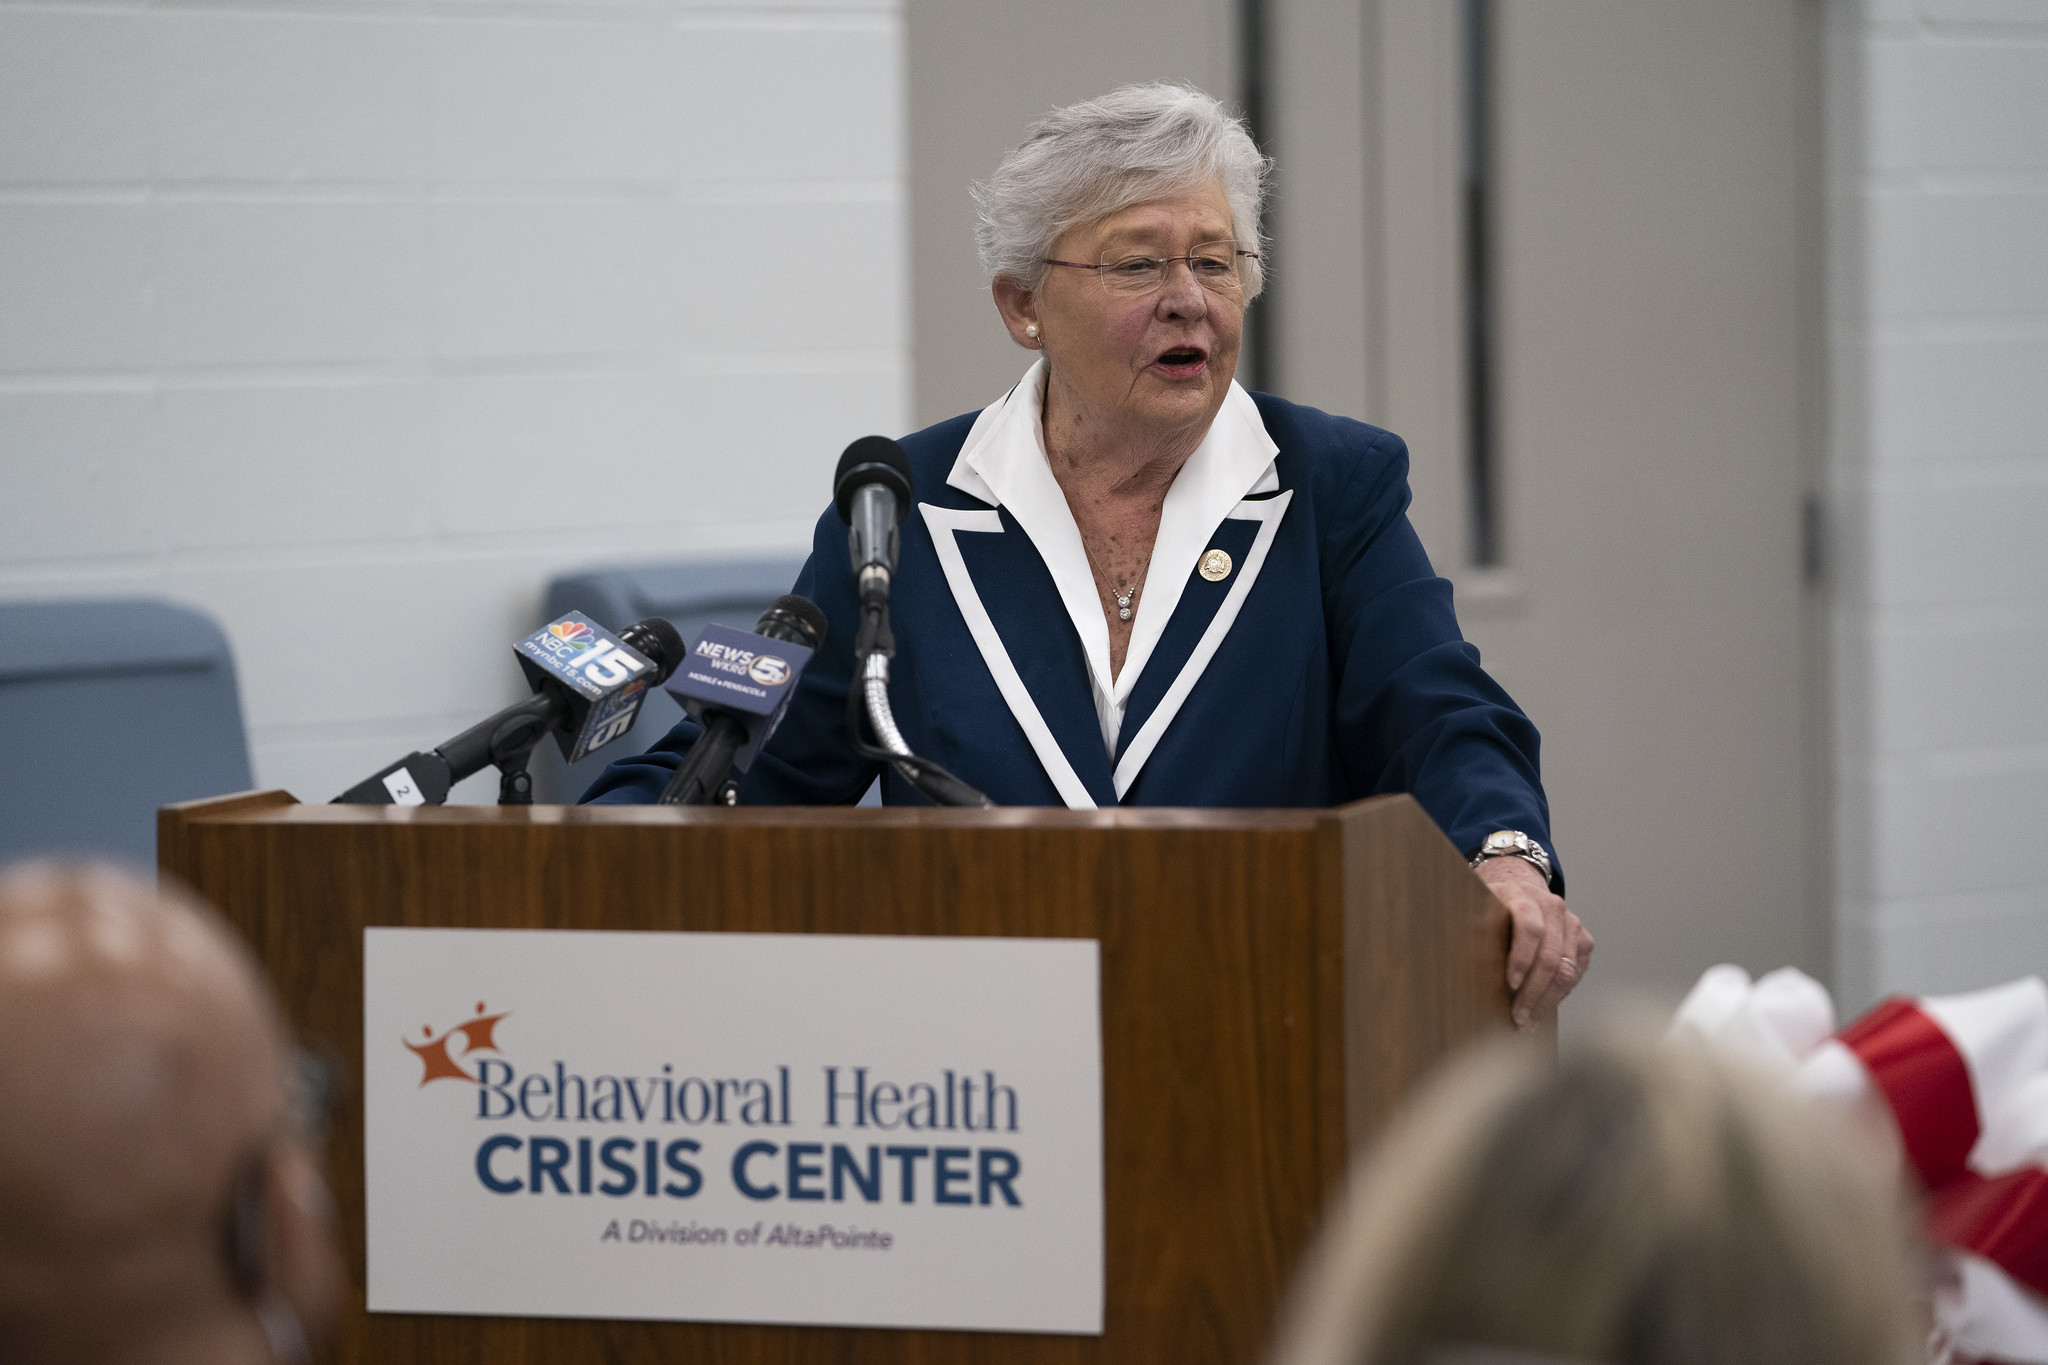 Governor Ivey Announces Two Additional Mental Health Crisis Centers